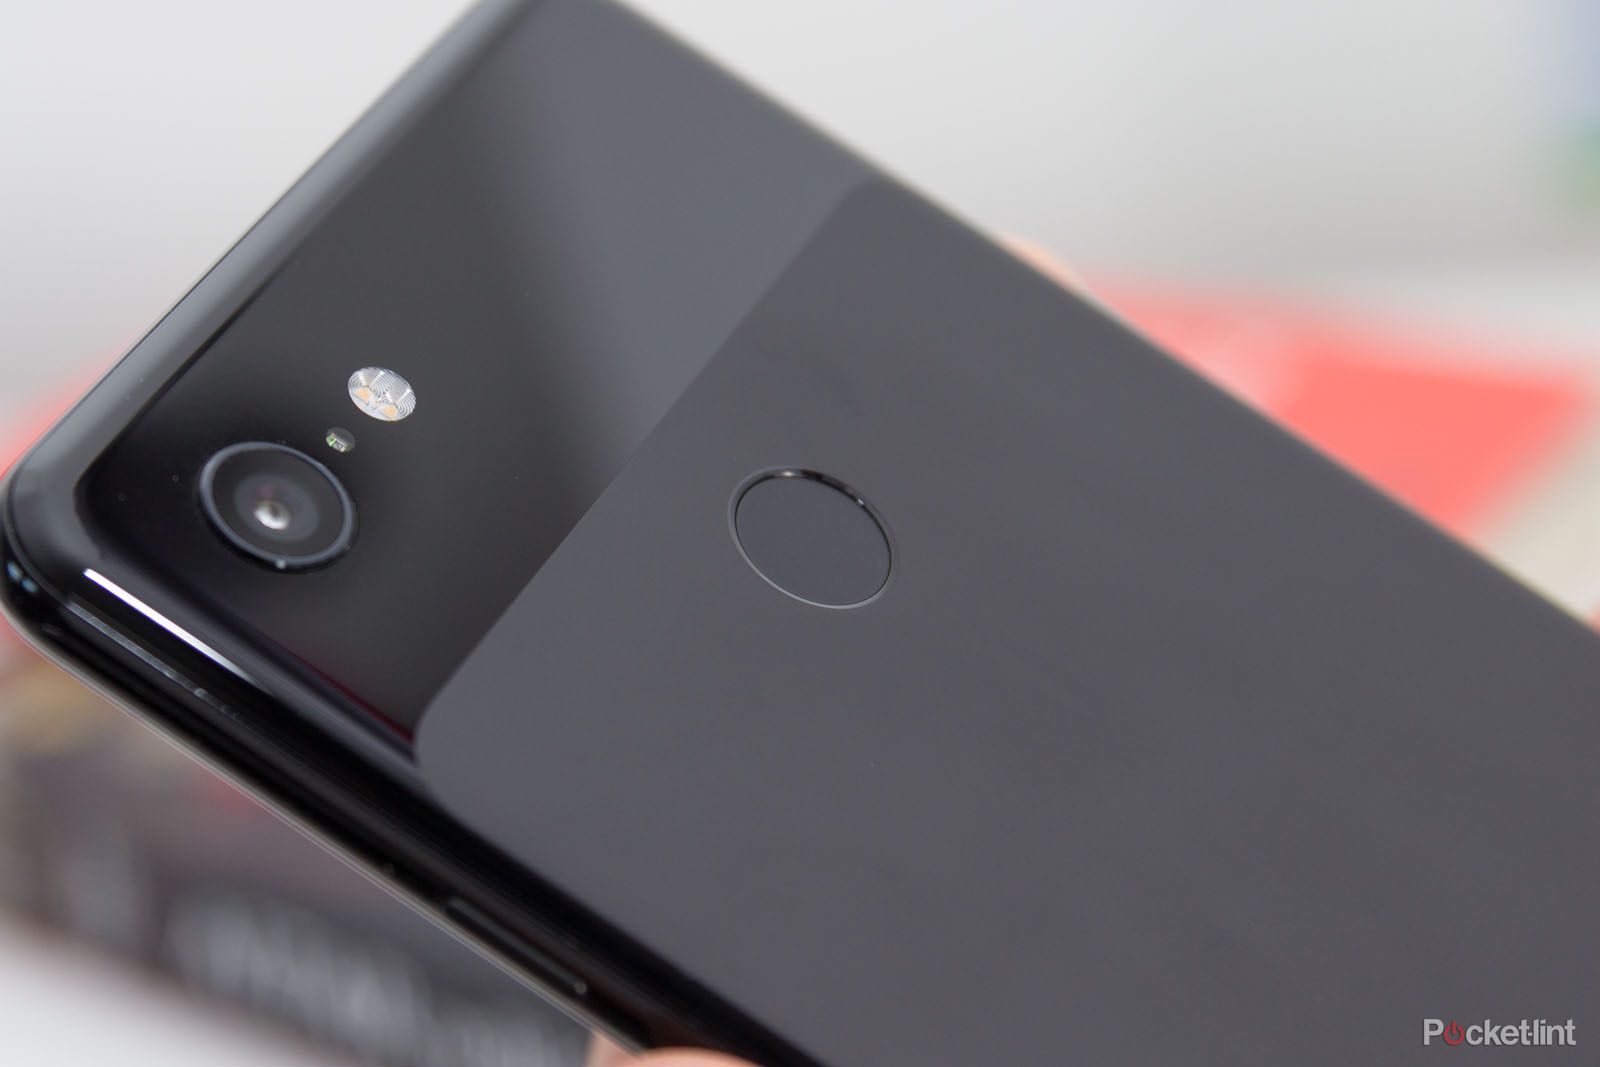 It looks like Googles Pixel 4 and Pixel 4 XL are codenamed Coral and Flame image 1